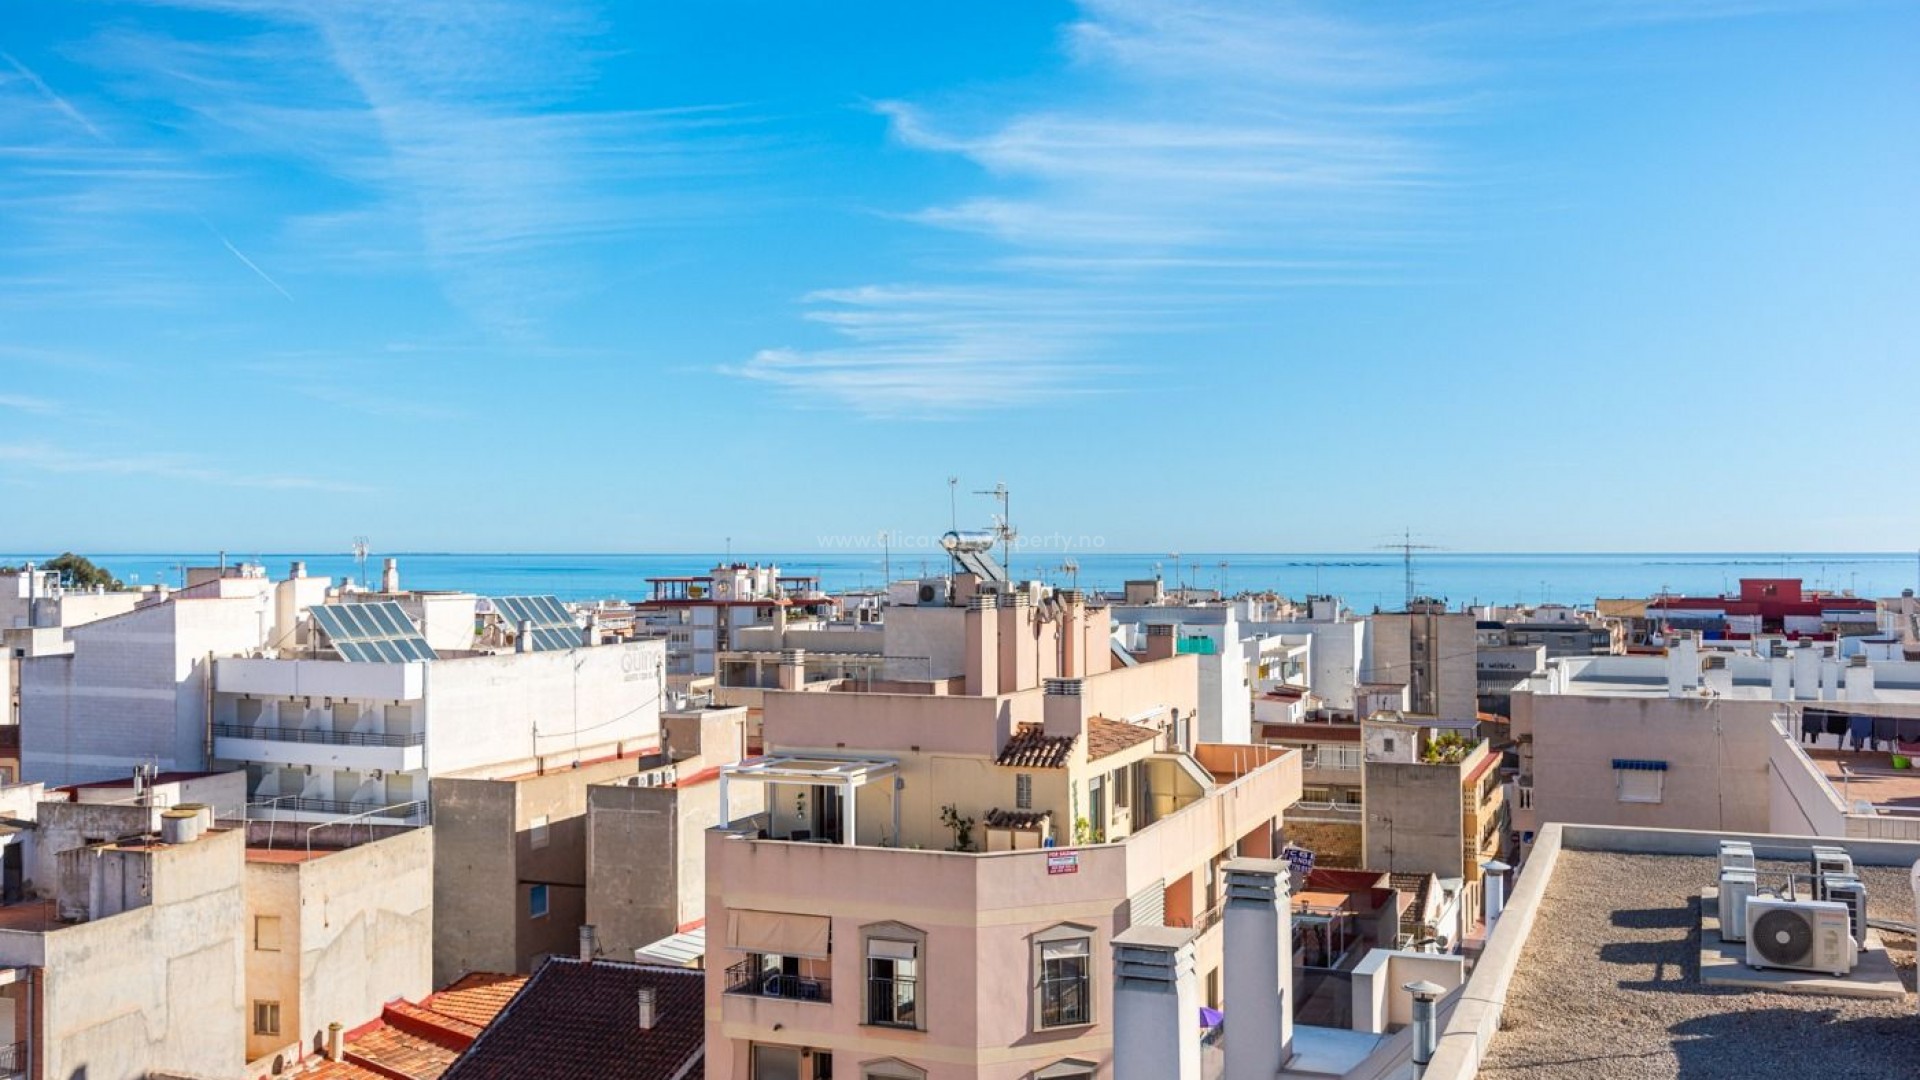 12 homes in the heart of Guardamar del Segura, 2 and 3 bedrooms and 2 bathrooms, terrace, solarium. Less than 500 meters from the beach